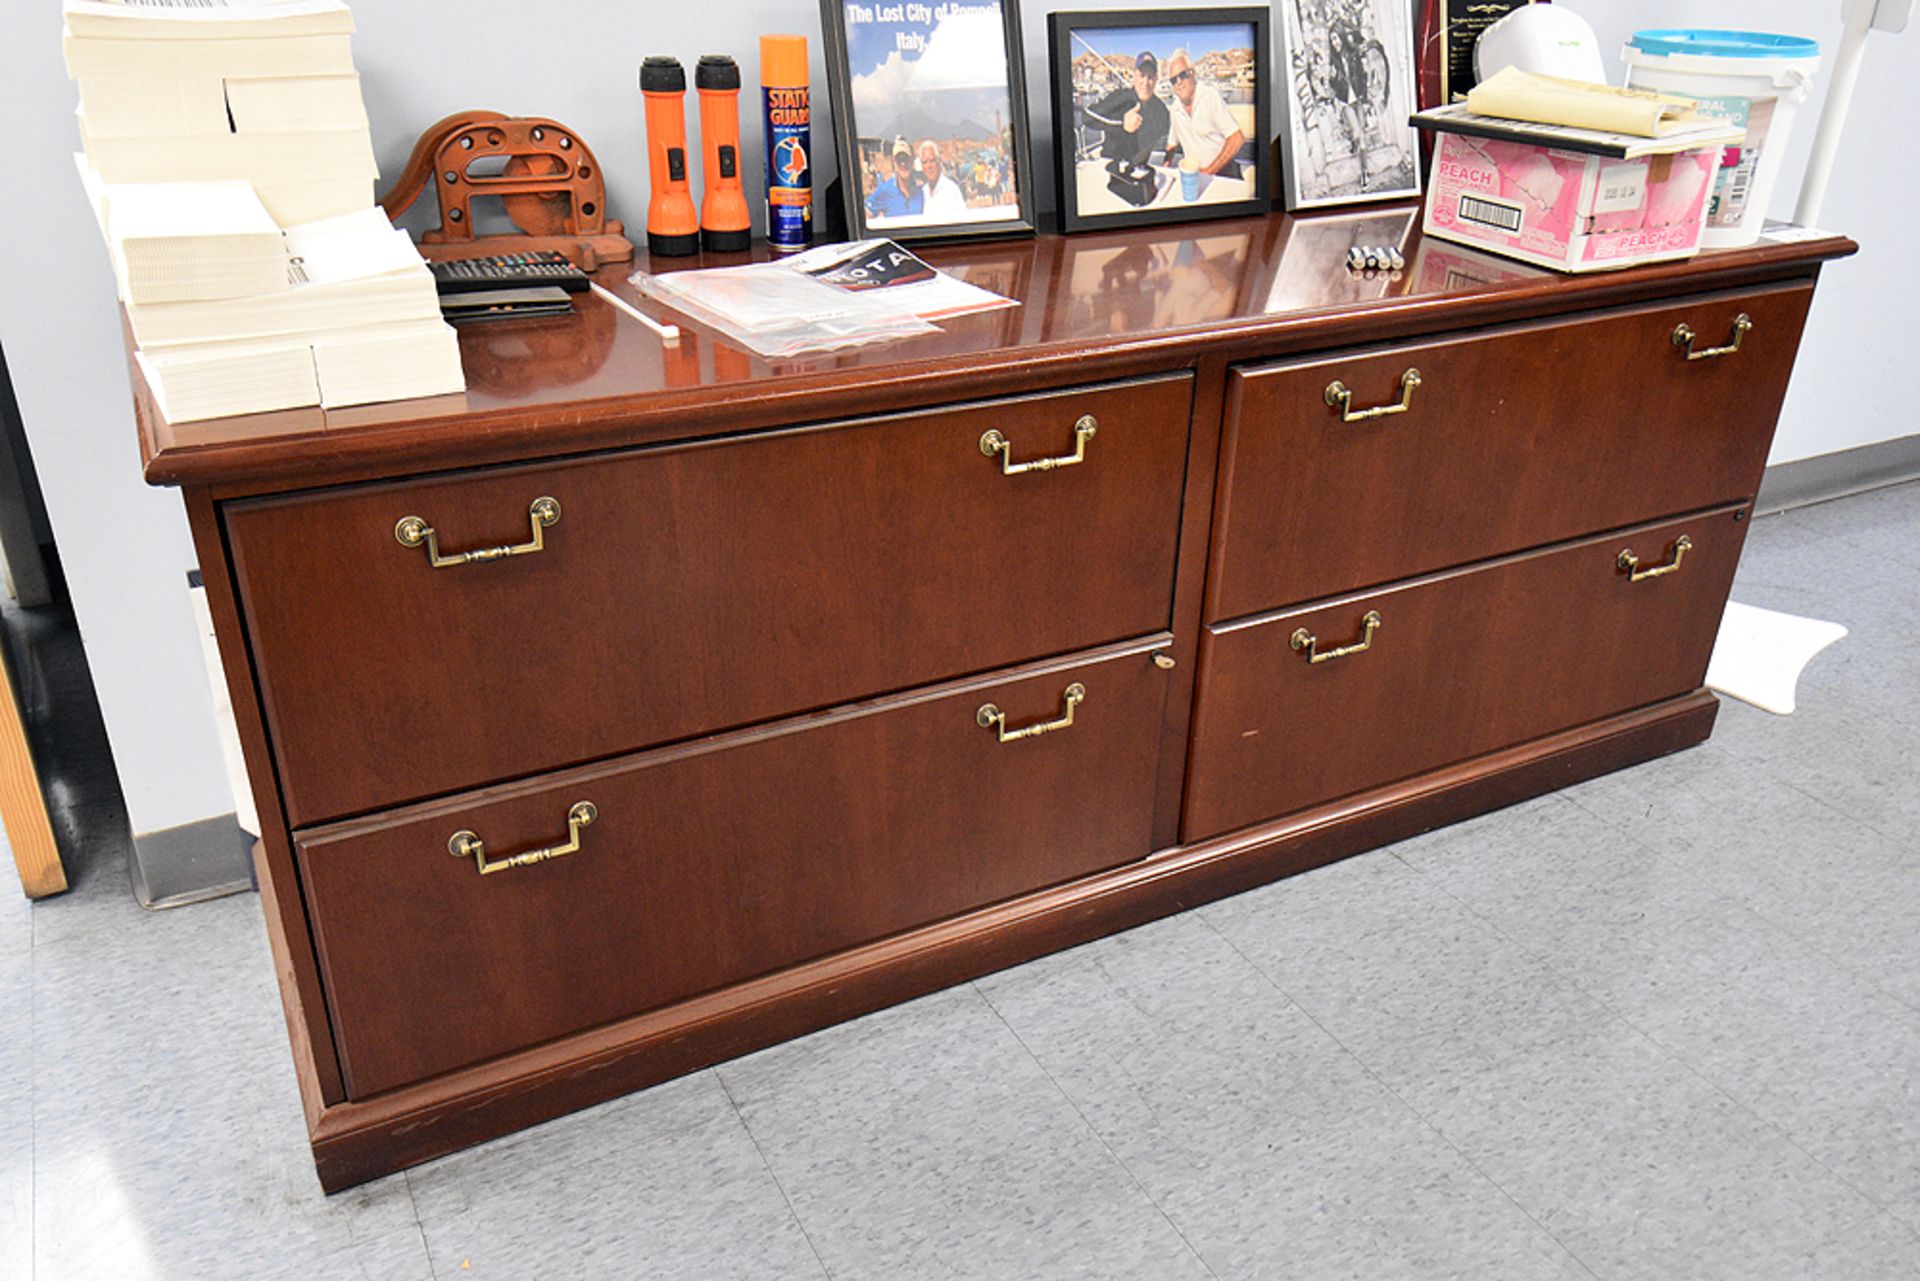 L-Shaped Desk (72"x77"x29"H) w/ Swivel Arm Chair and (1) 4-Draw File Cabinet (75" x 21"x29"H) - Image 2 of 2